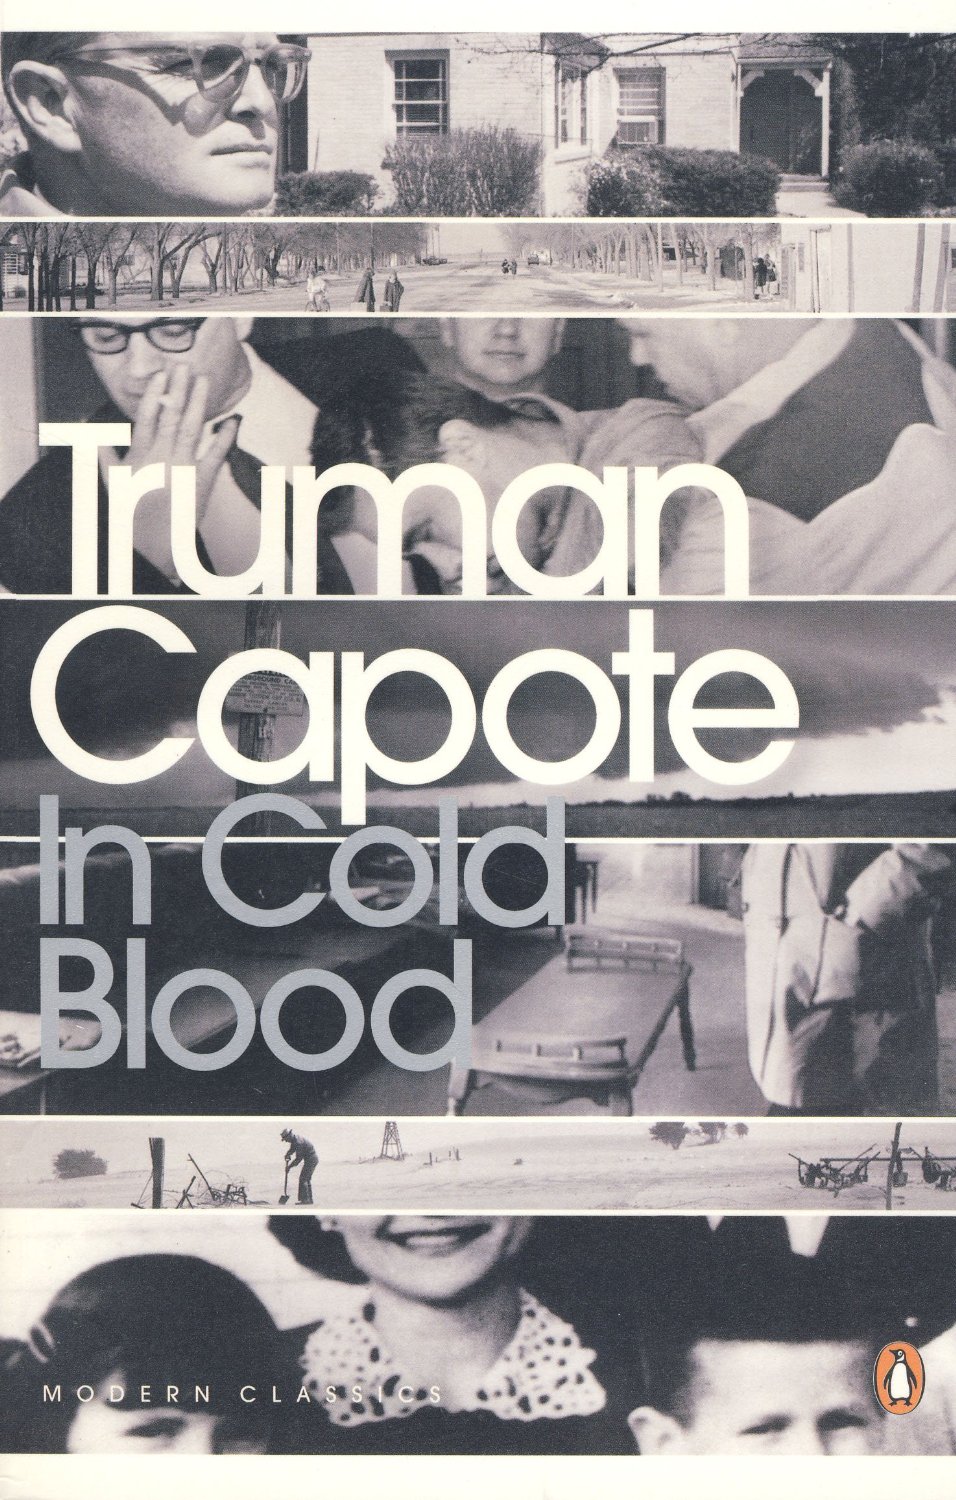 Dissertation capote in cold blood